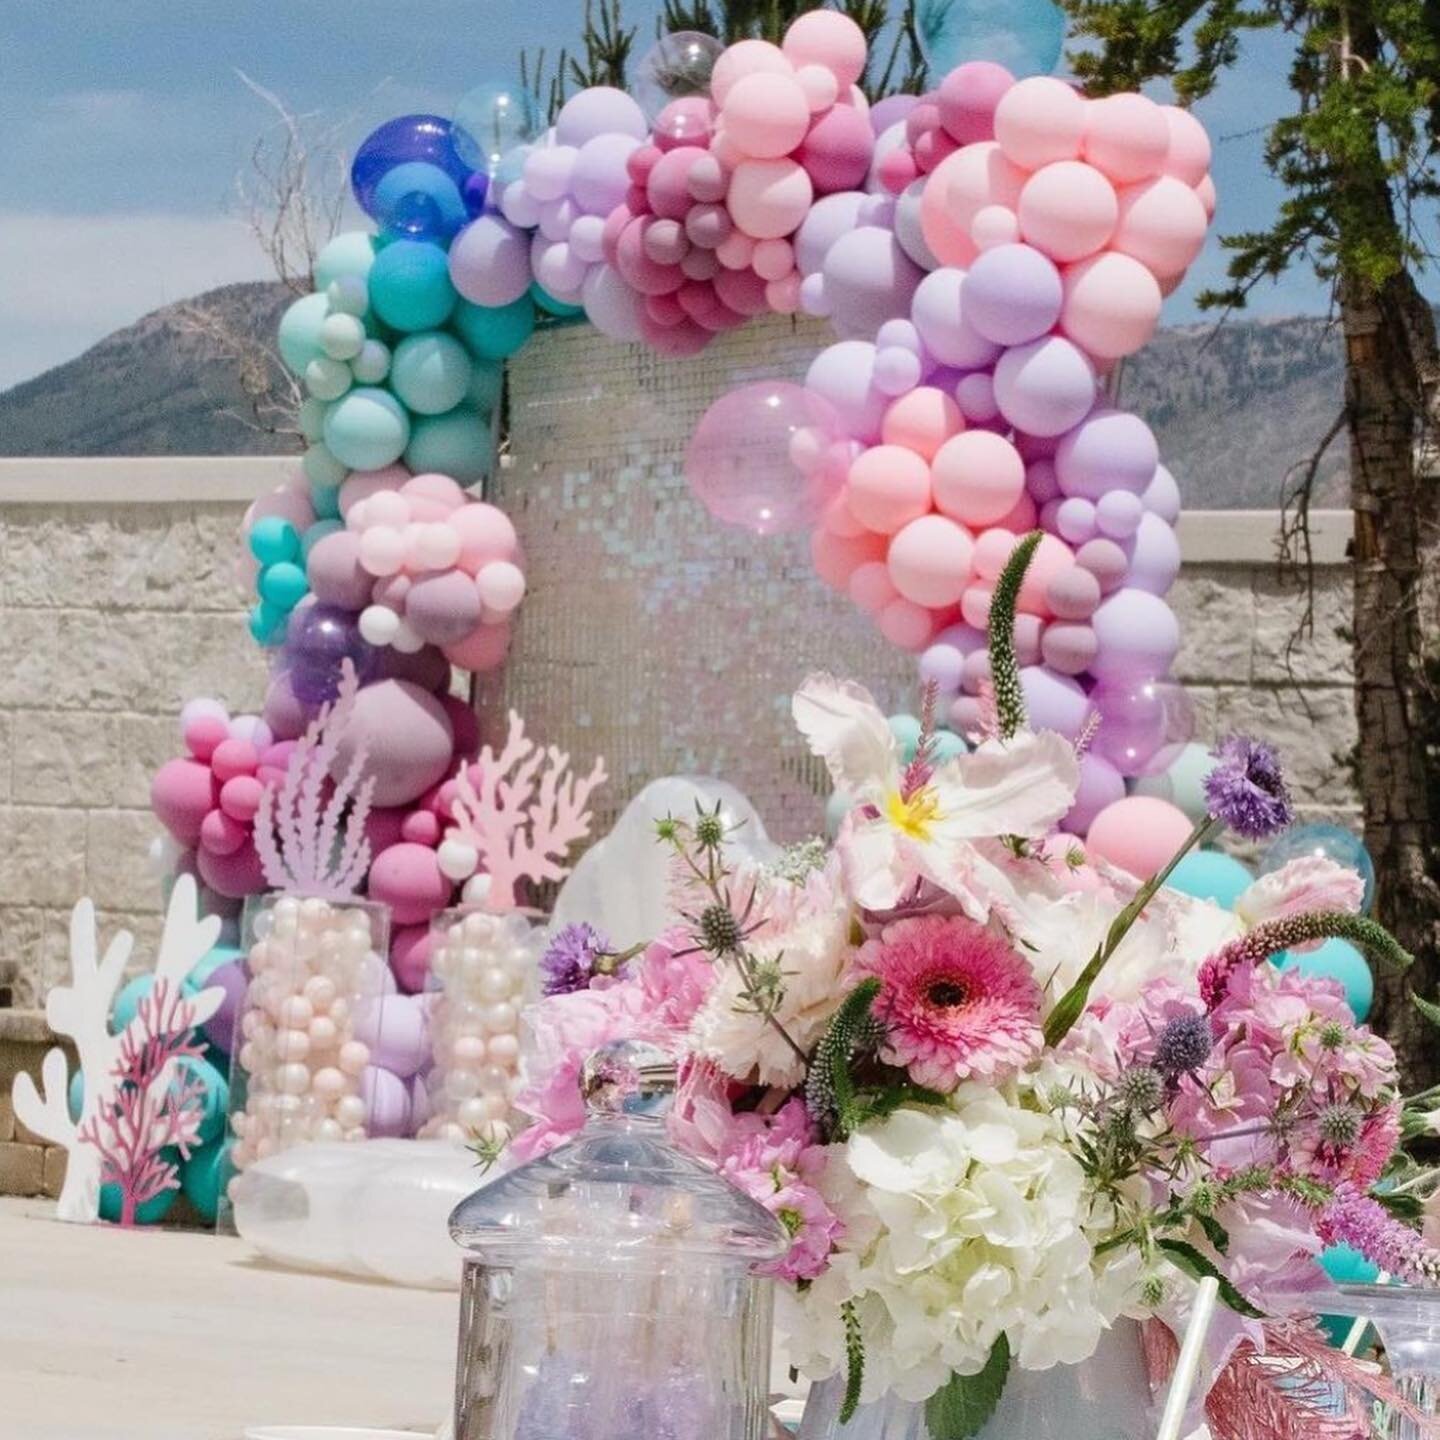 It&rsquo;s the most mer-mazing shellabration you&rsquo;ll ever sea 💜💕💙

A good planner who is creative, will think about your experience from start to finish, and has great relationships with great vendors is essential to hosting a party that is s